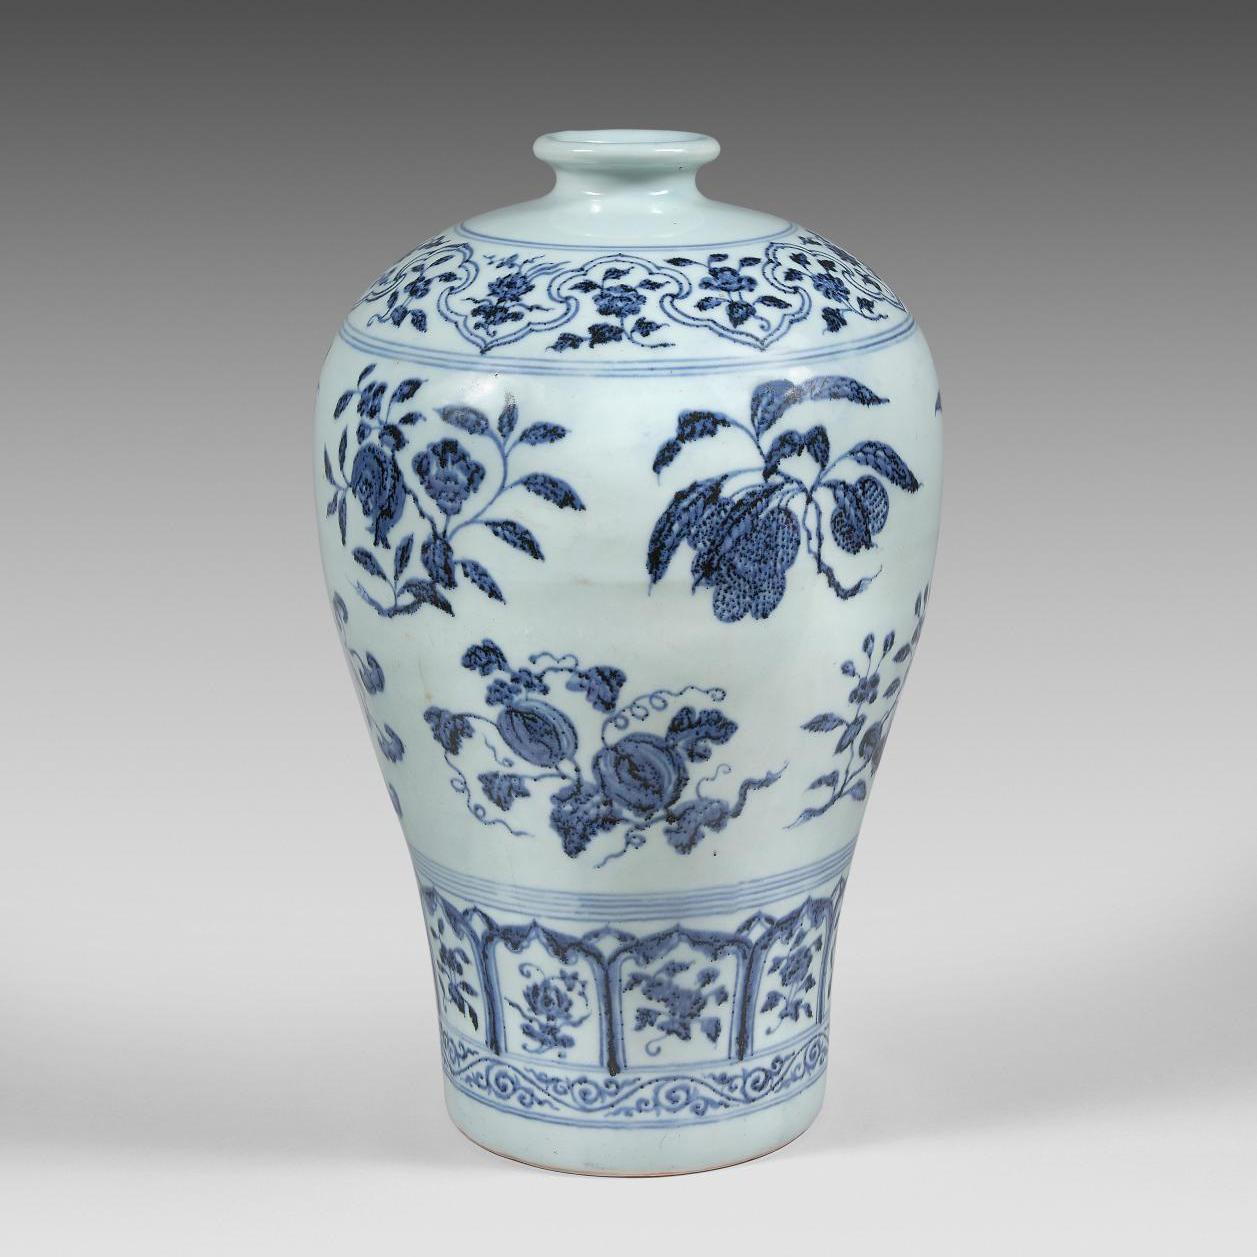 The "Blue and White" Splendors of a Ming Vase - Pre-sale